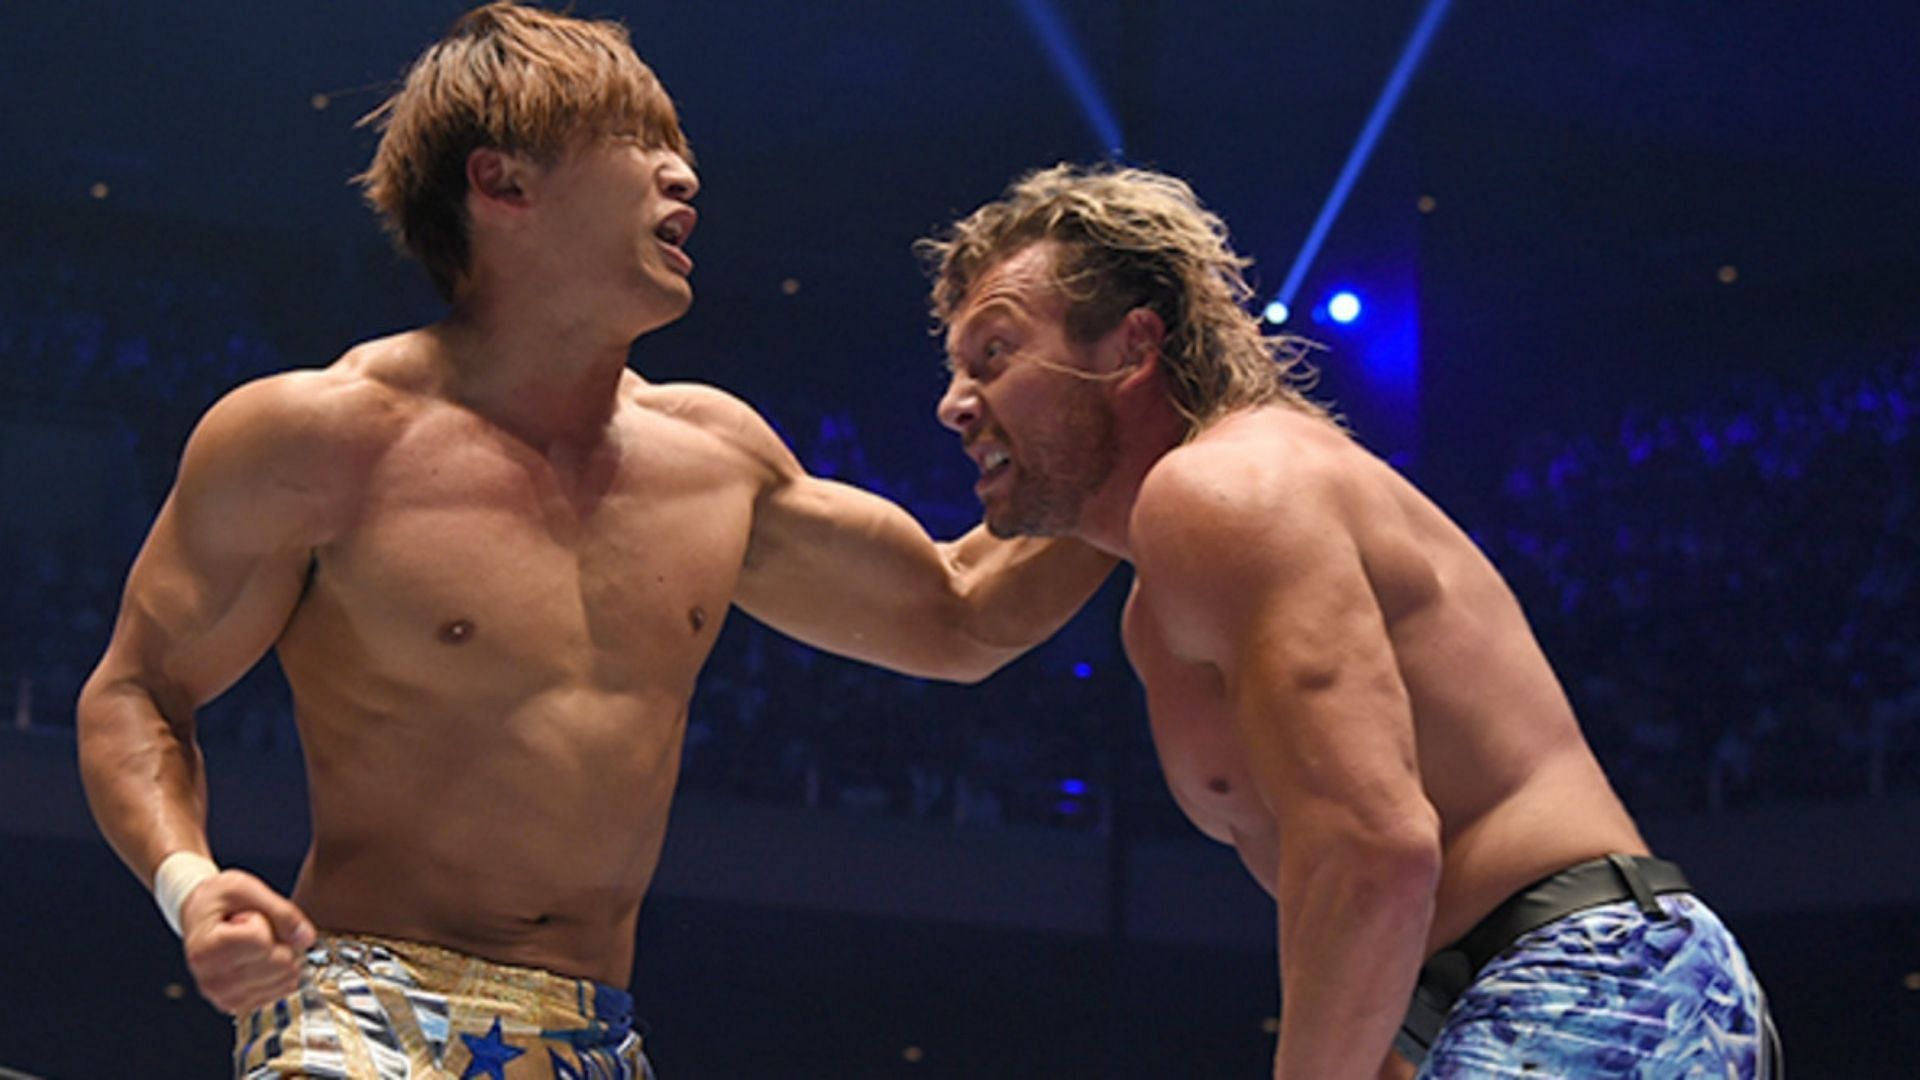 Kota Ibushi and Kenny Omega share a layered history with one another